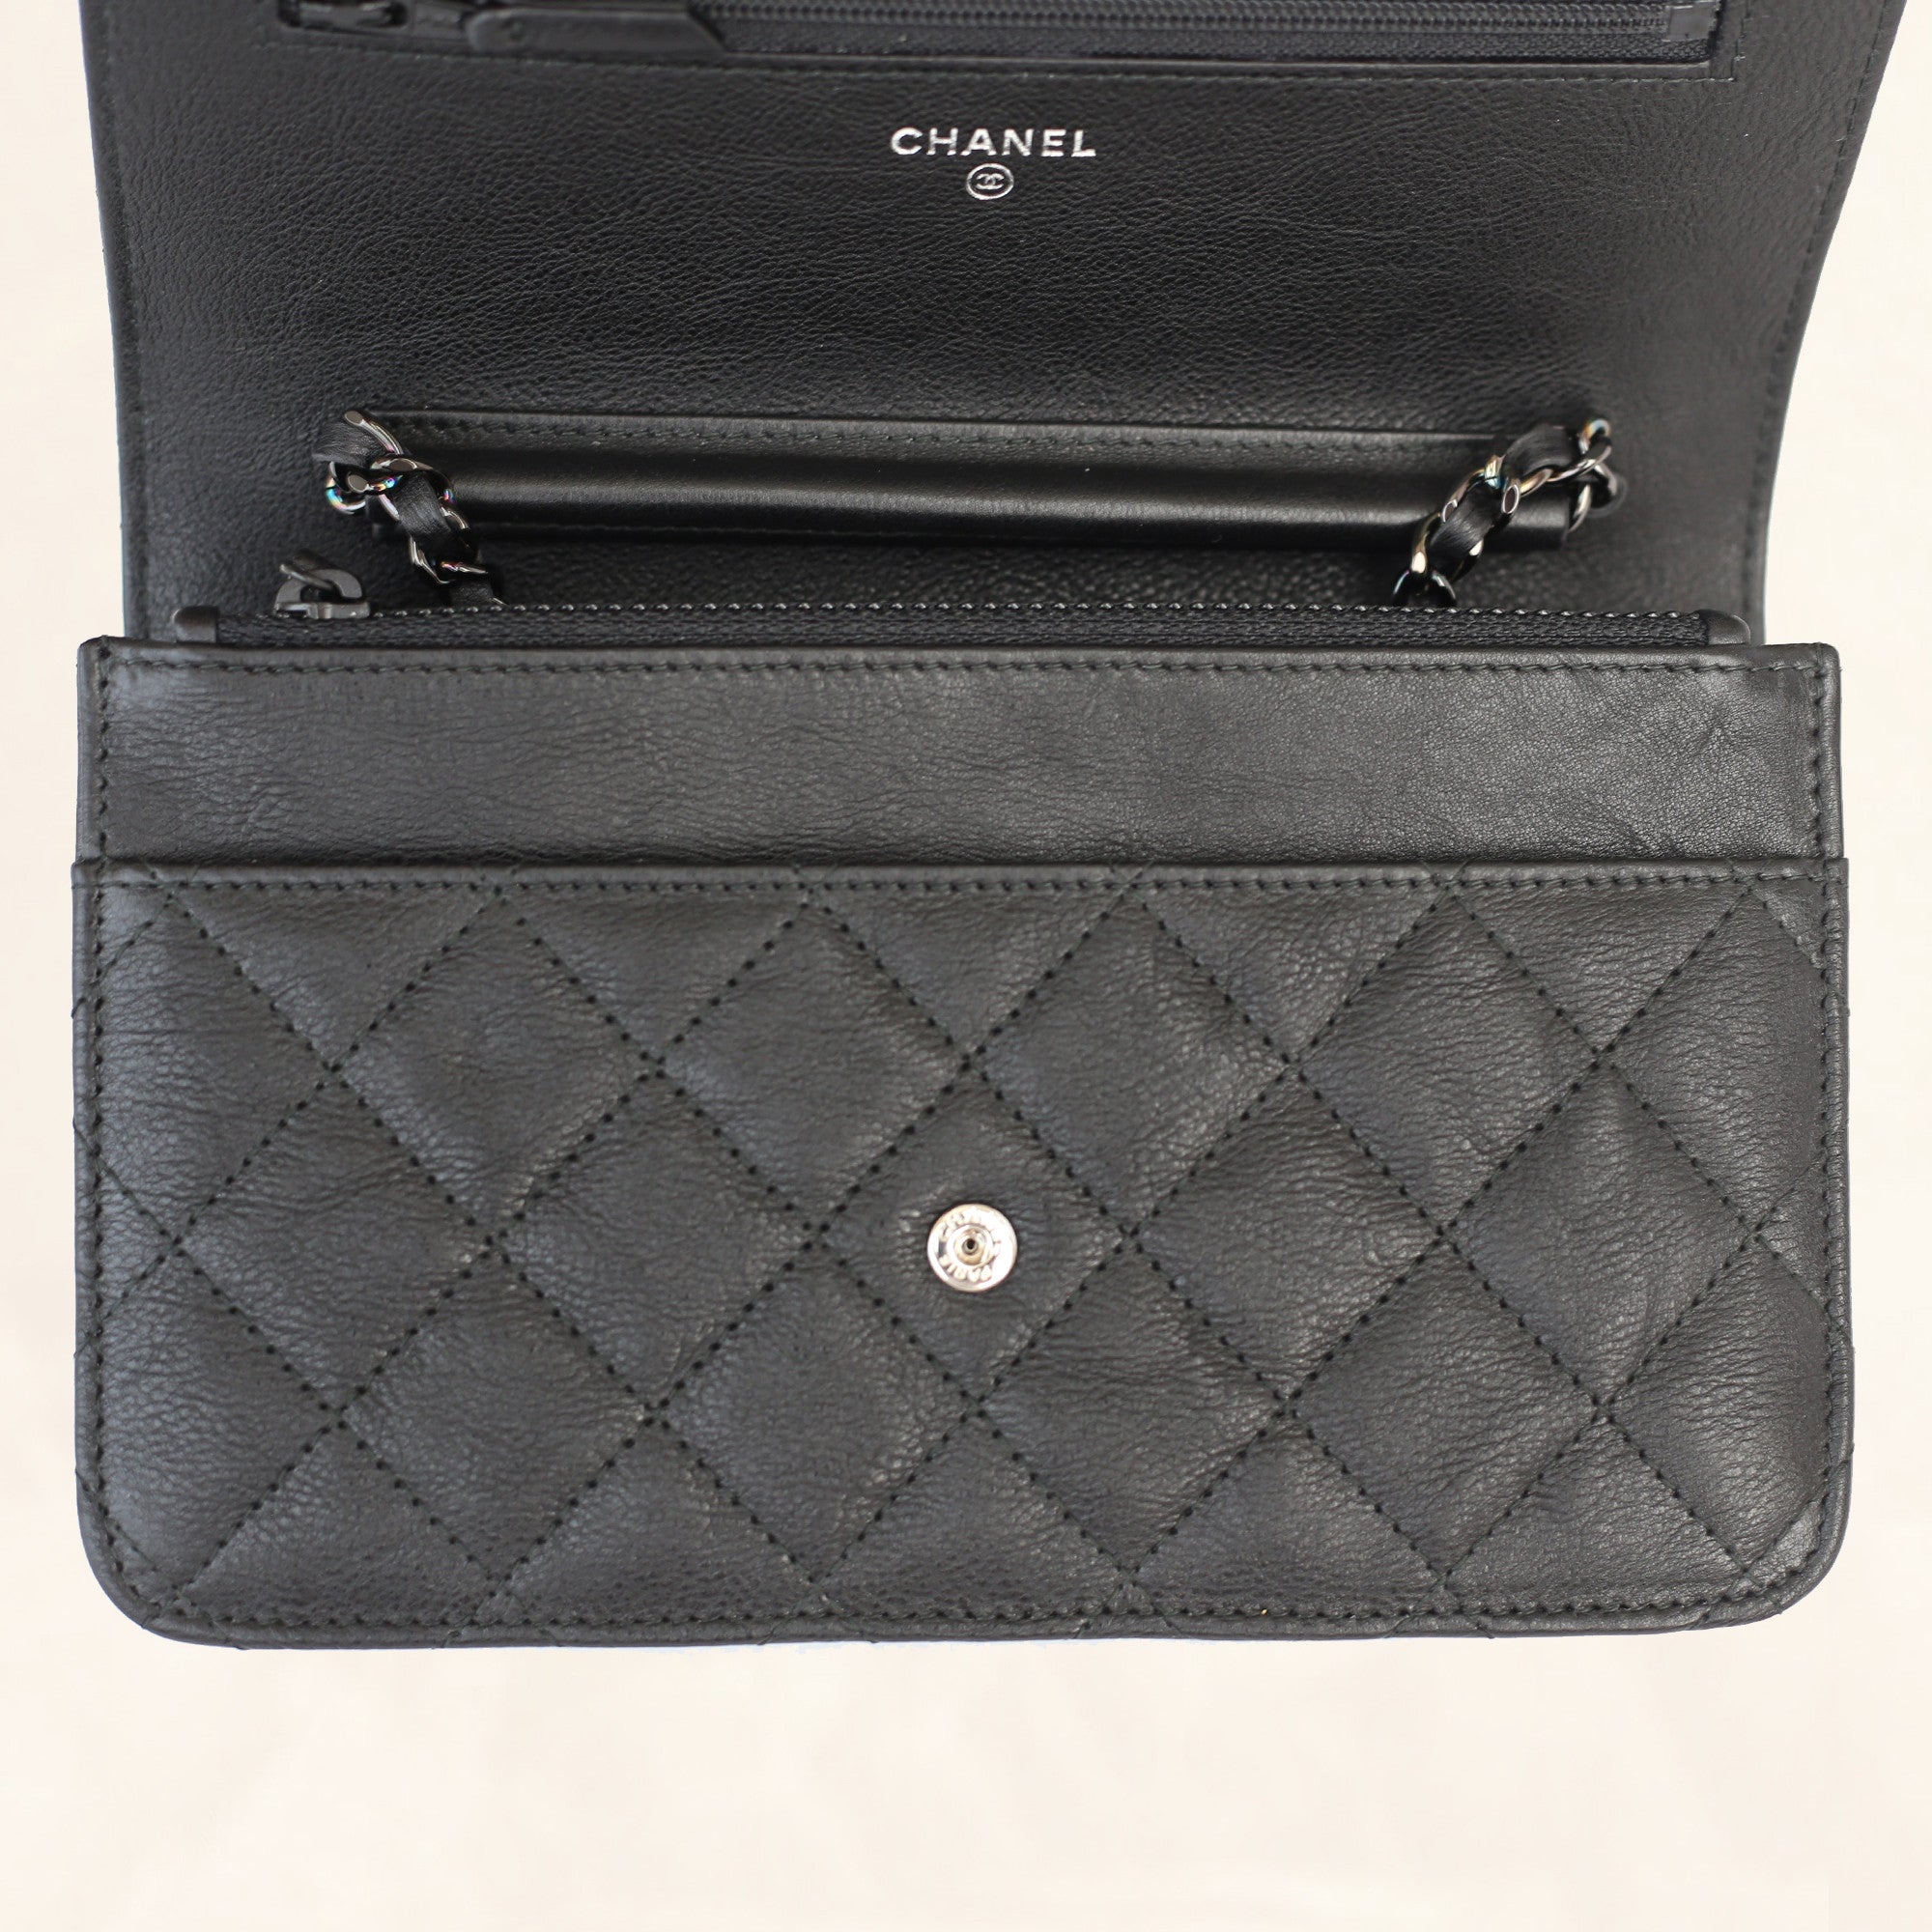 Chanel Black Caviar Leather Classic Flat Wallet Pouch Chanel